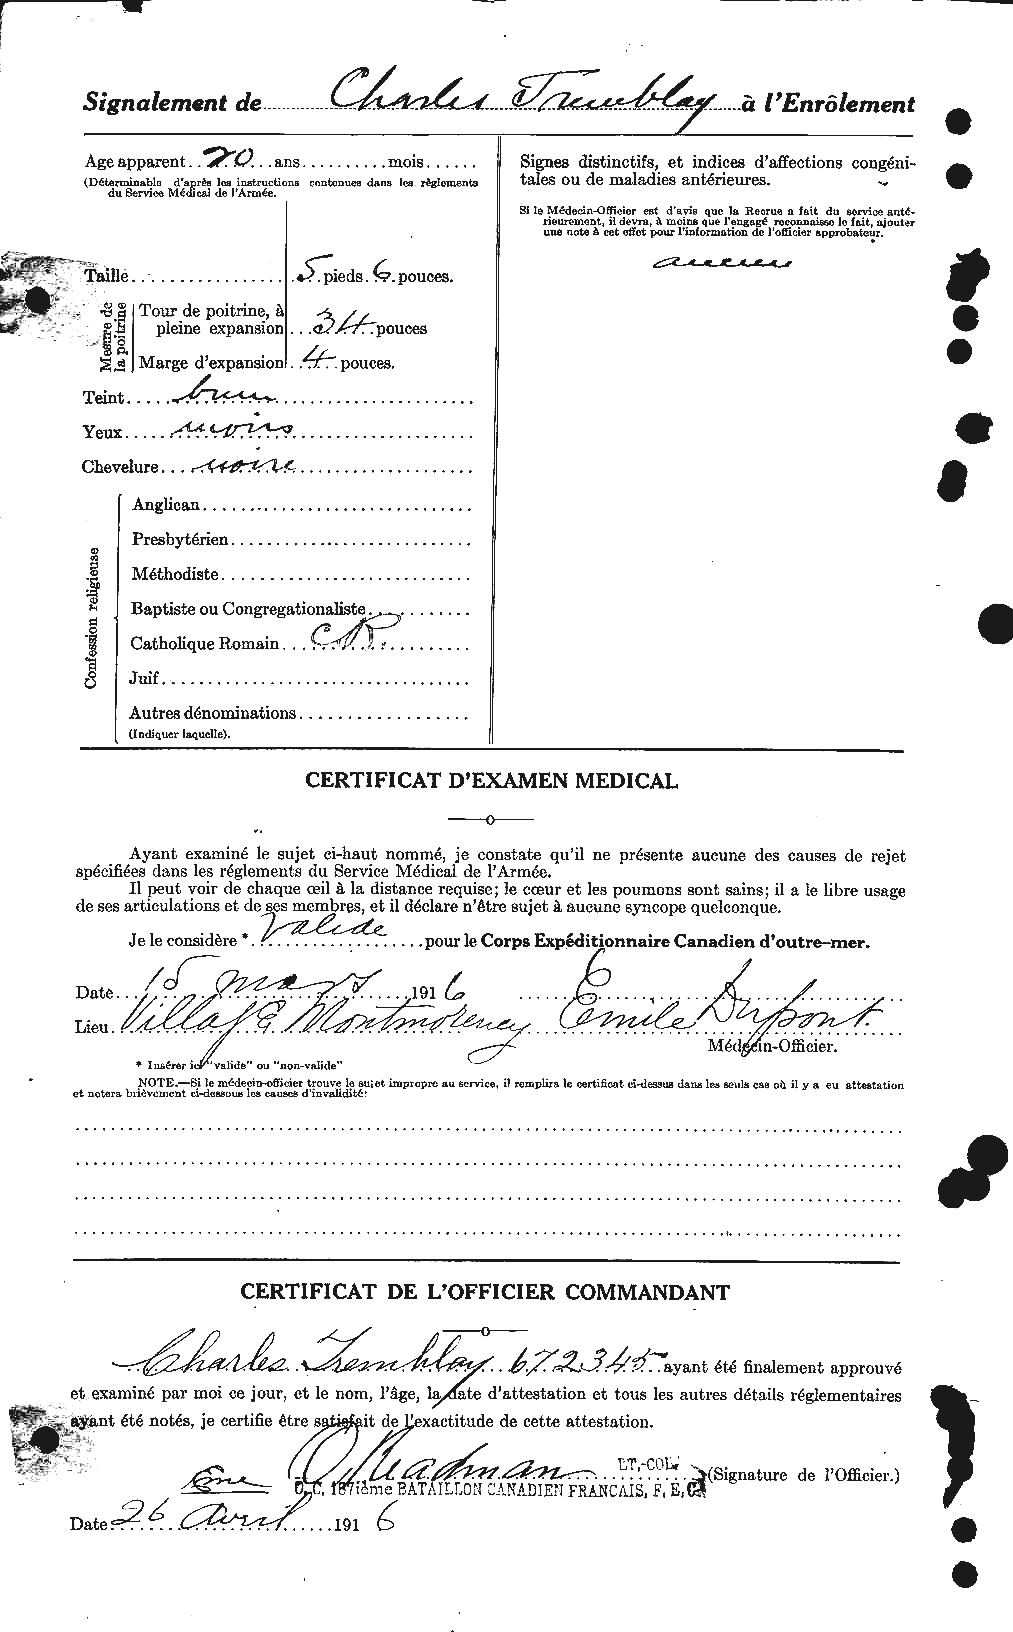 Personnel Records of the First World War - CEF 638982b